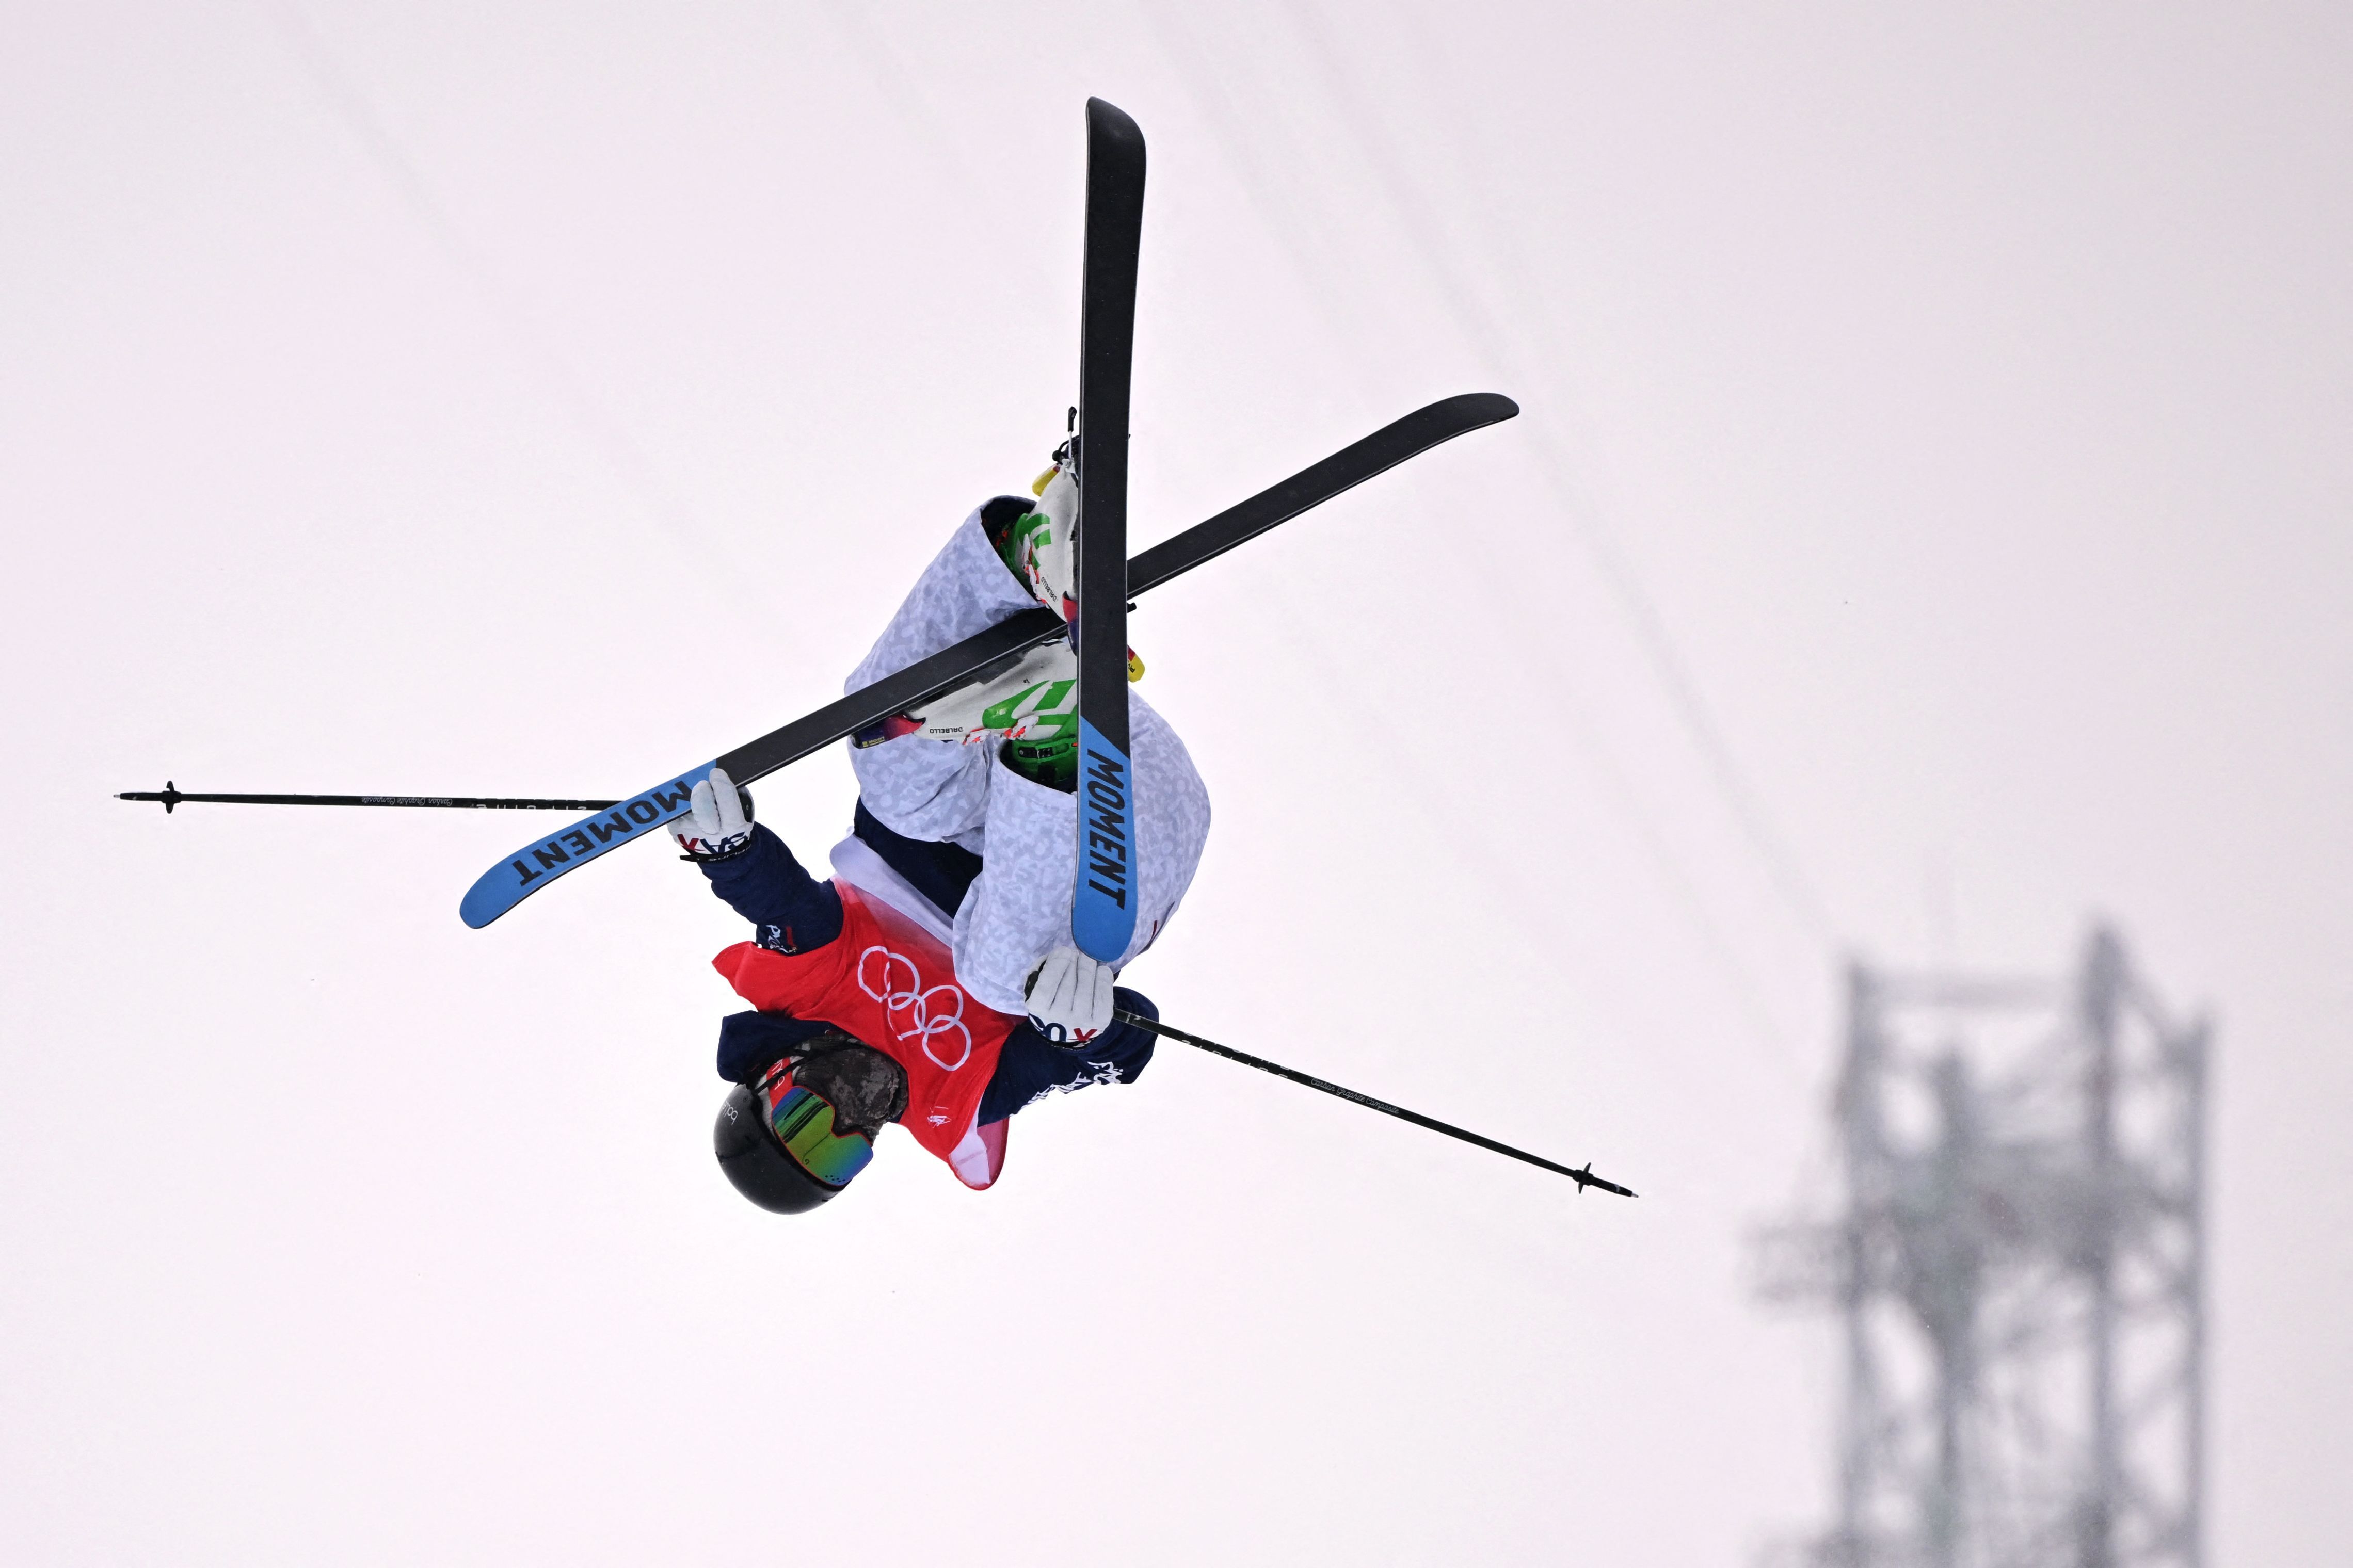 USA's David Wise competes in the freestyle skiing men's freeski halfpipe qualification run during the Winter Olympic Games in Zhangjiakou on February 17.